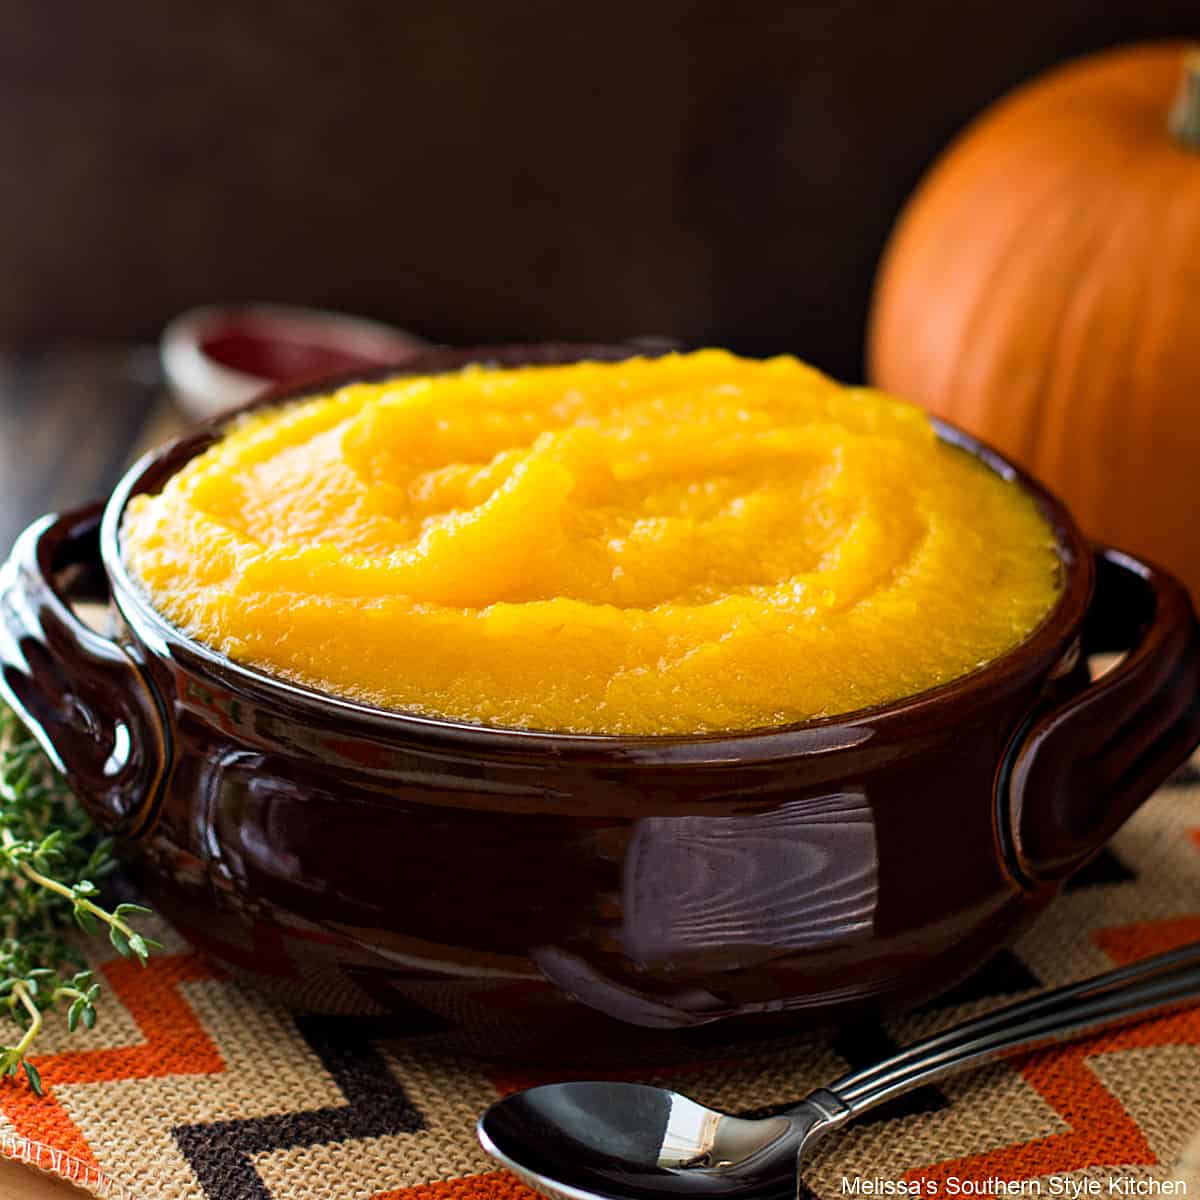 A bowl containing homemade pumpkin puree on a table next to a spoon and a pumpkin.